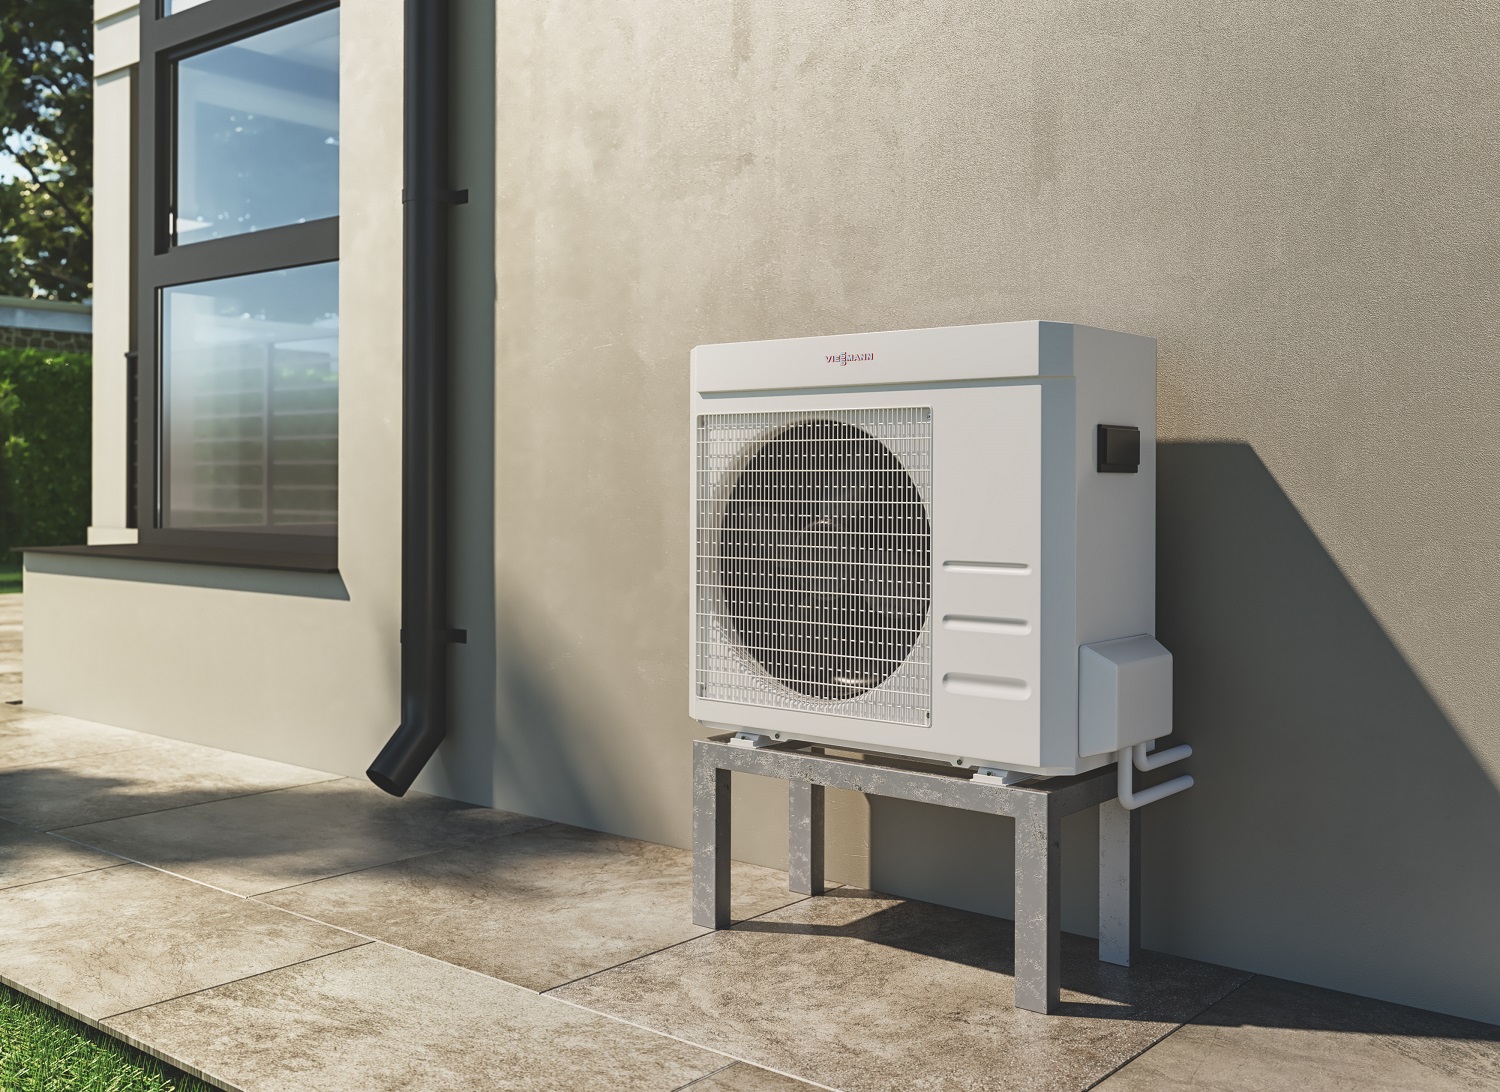 Viessmann has entered the monobloc air source heat pump market with the introduction of the new Vitocal 100-A air source heat pump